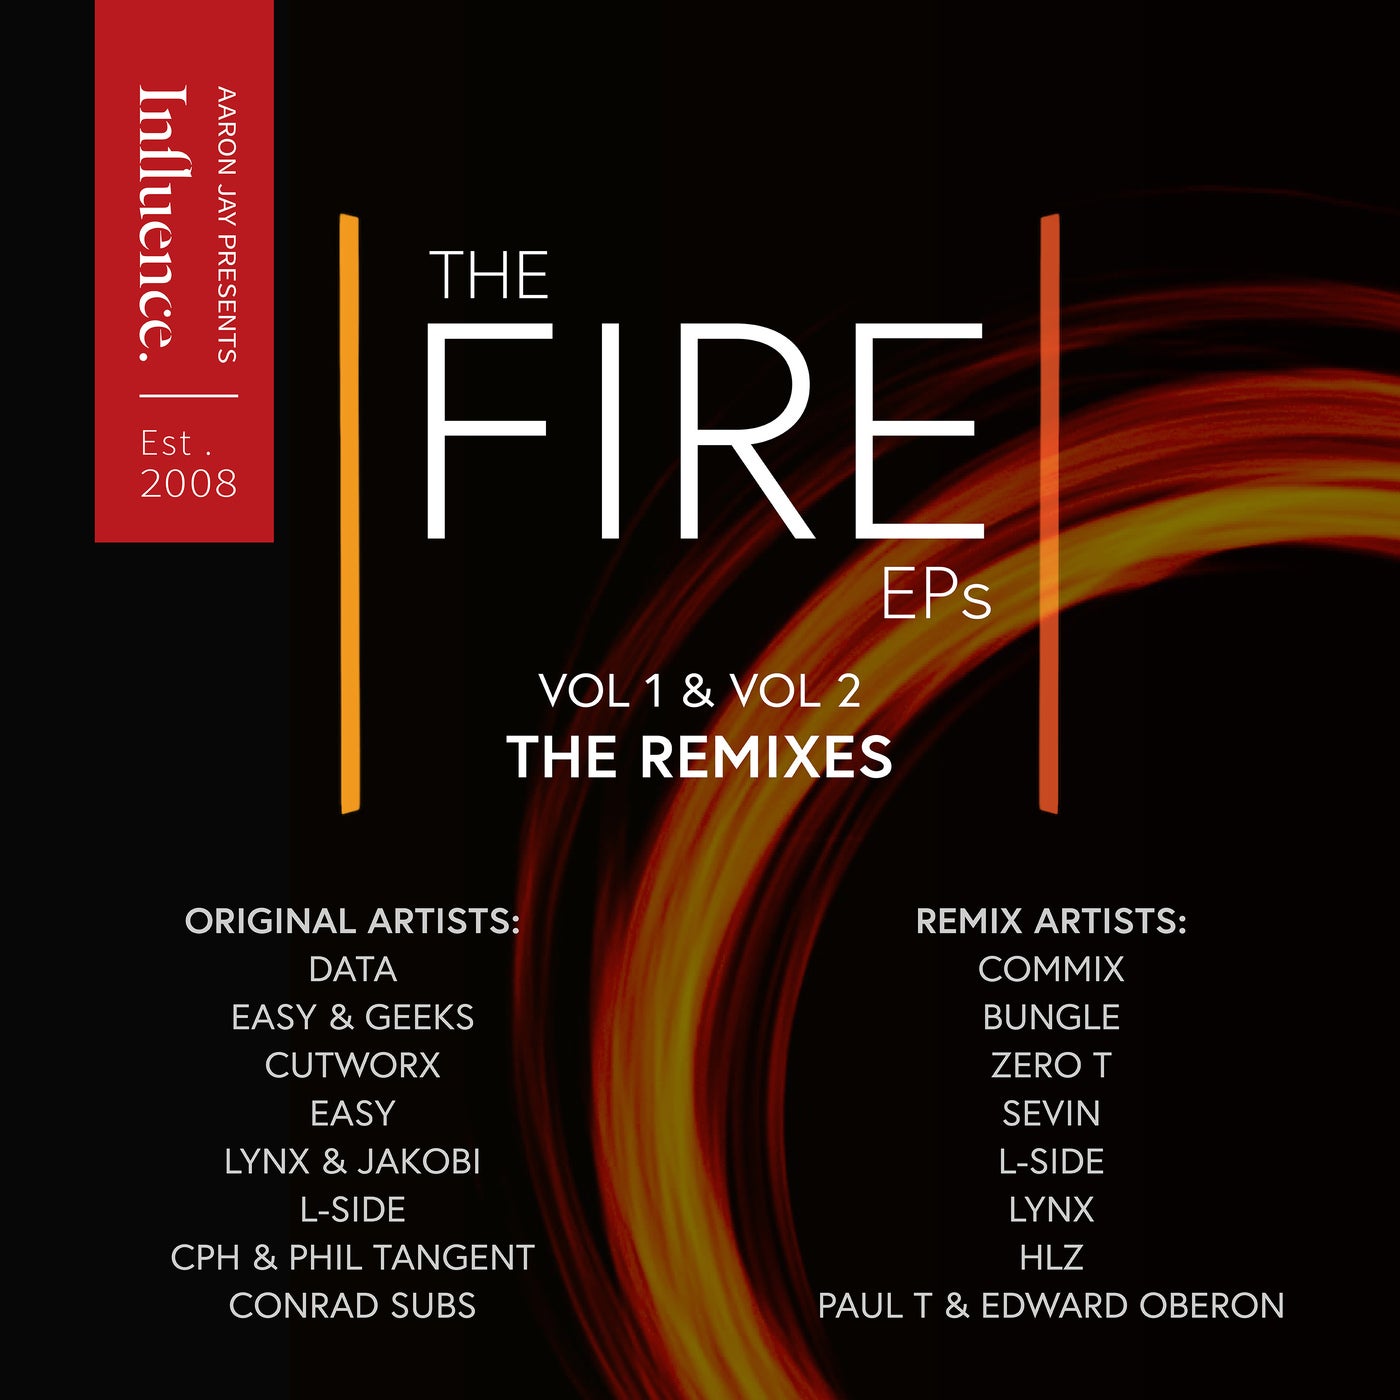 DatA, Easy & Geeks – The Fire EPs, Vol. 1 & Vol. 2 (The Remixes) [INFLUGB0056]